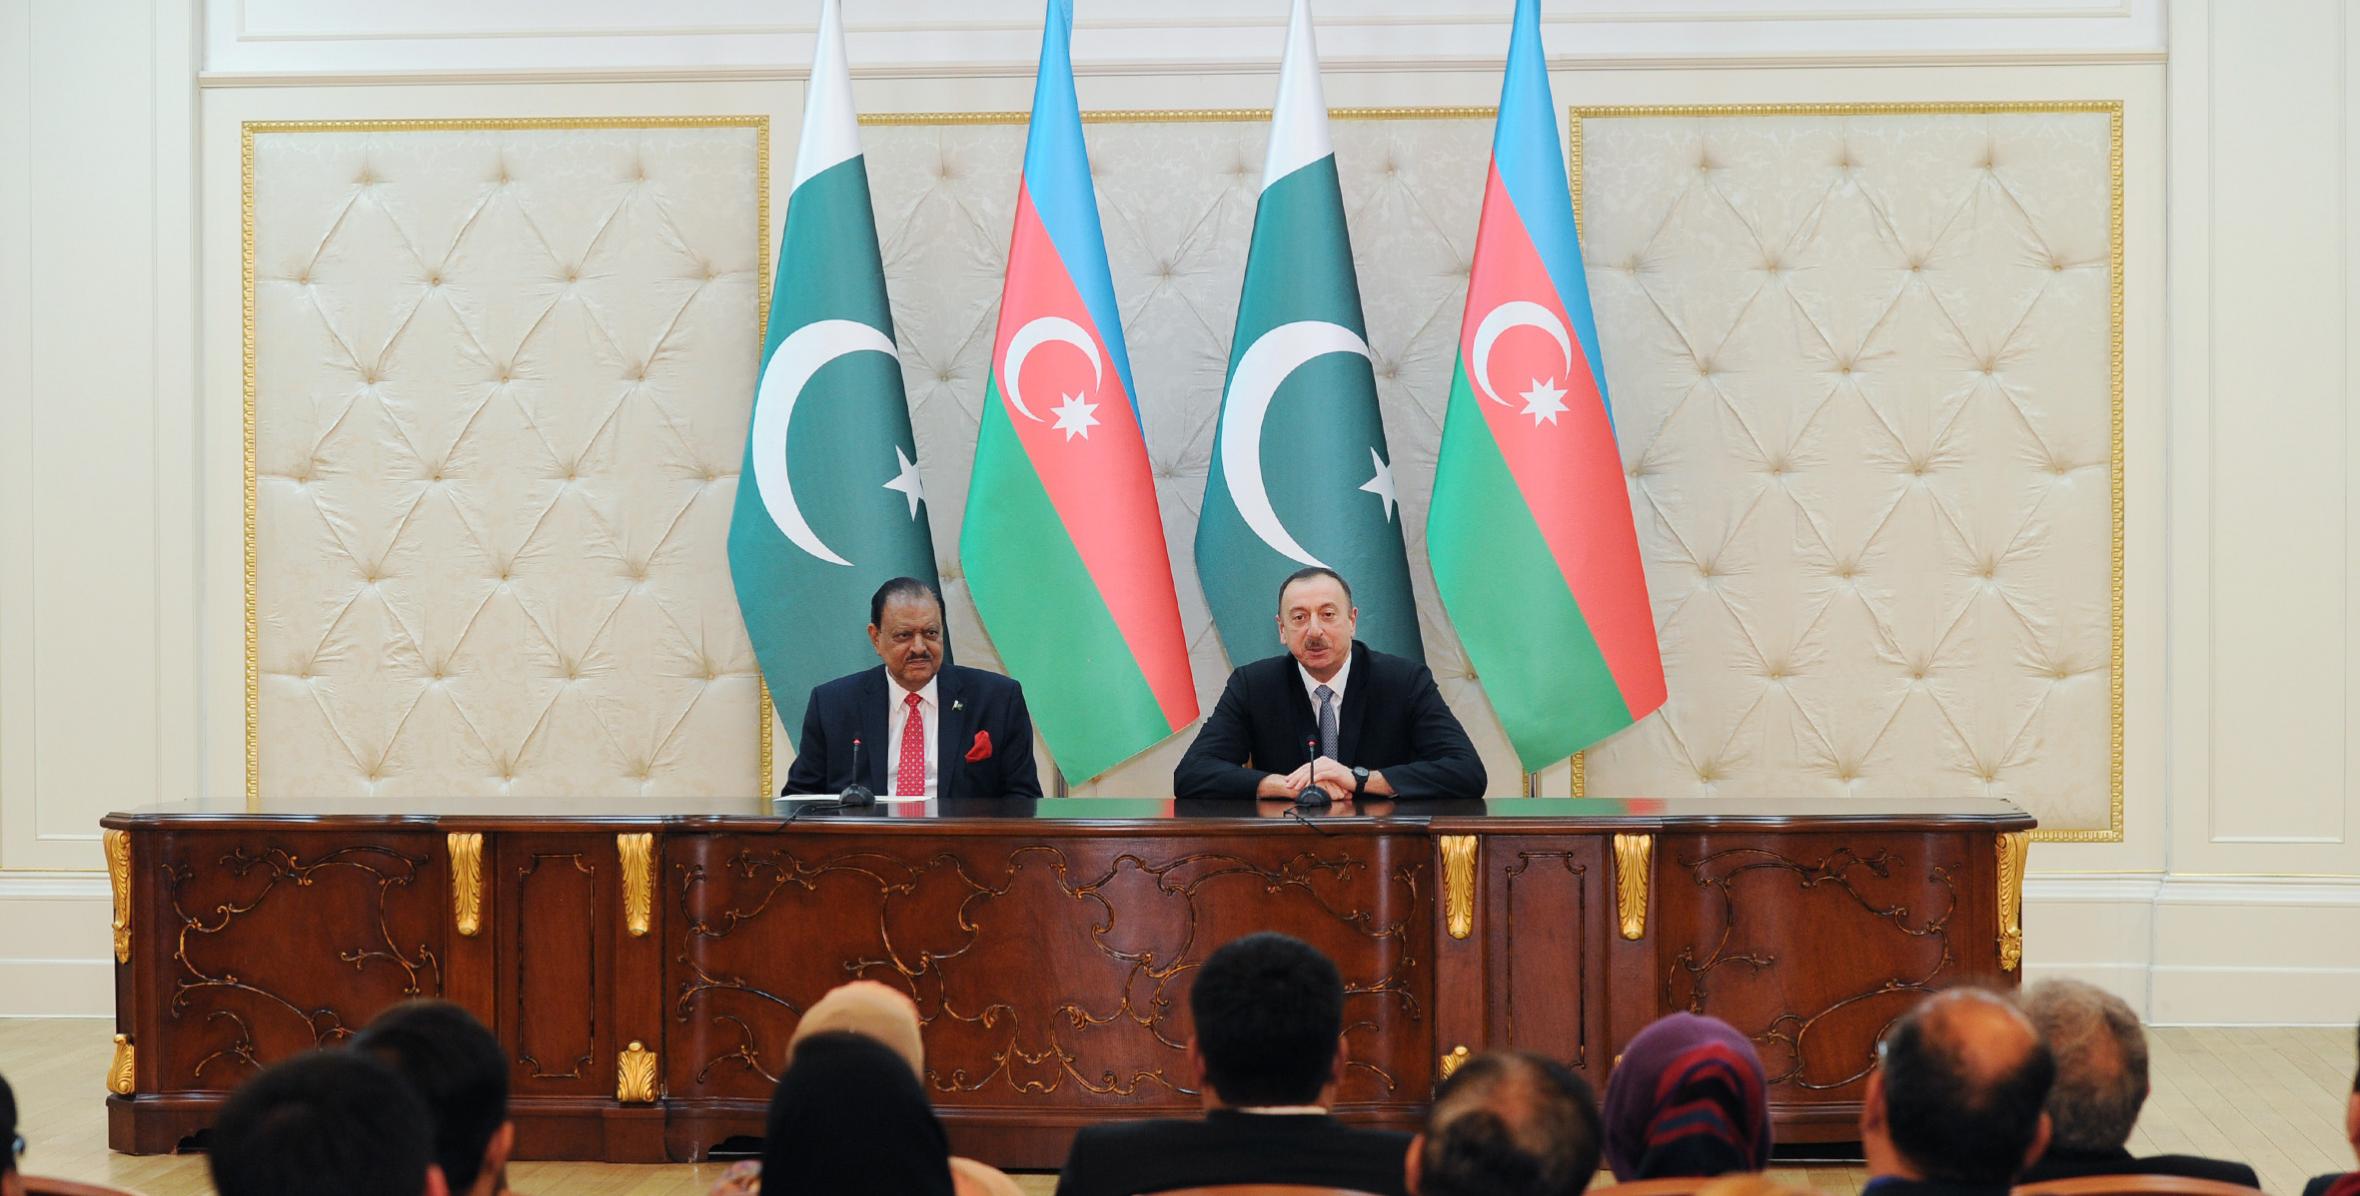 Presidents of Azerbaijan and Pakistan made statements for the press